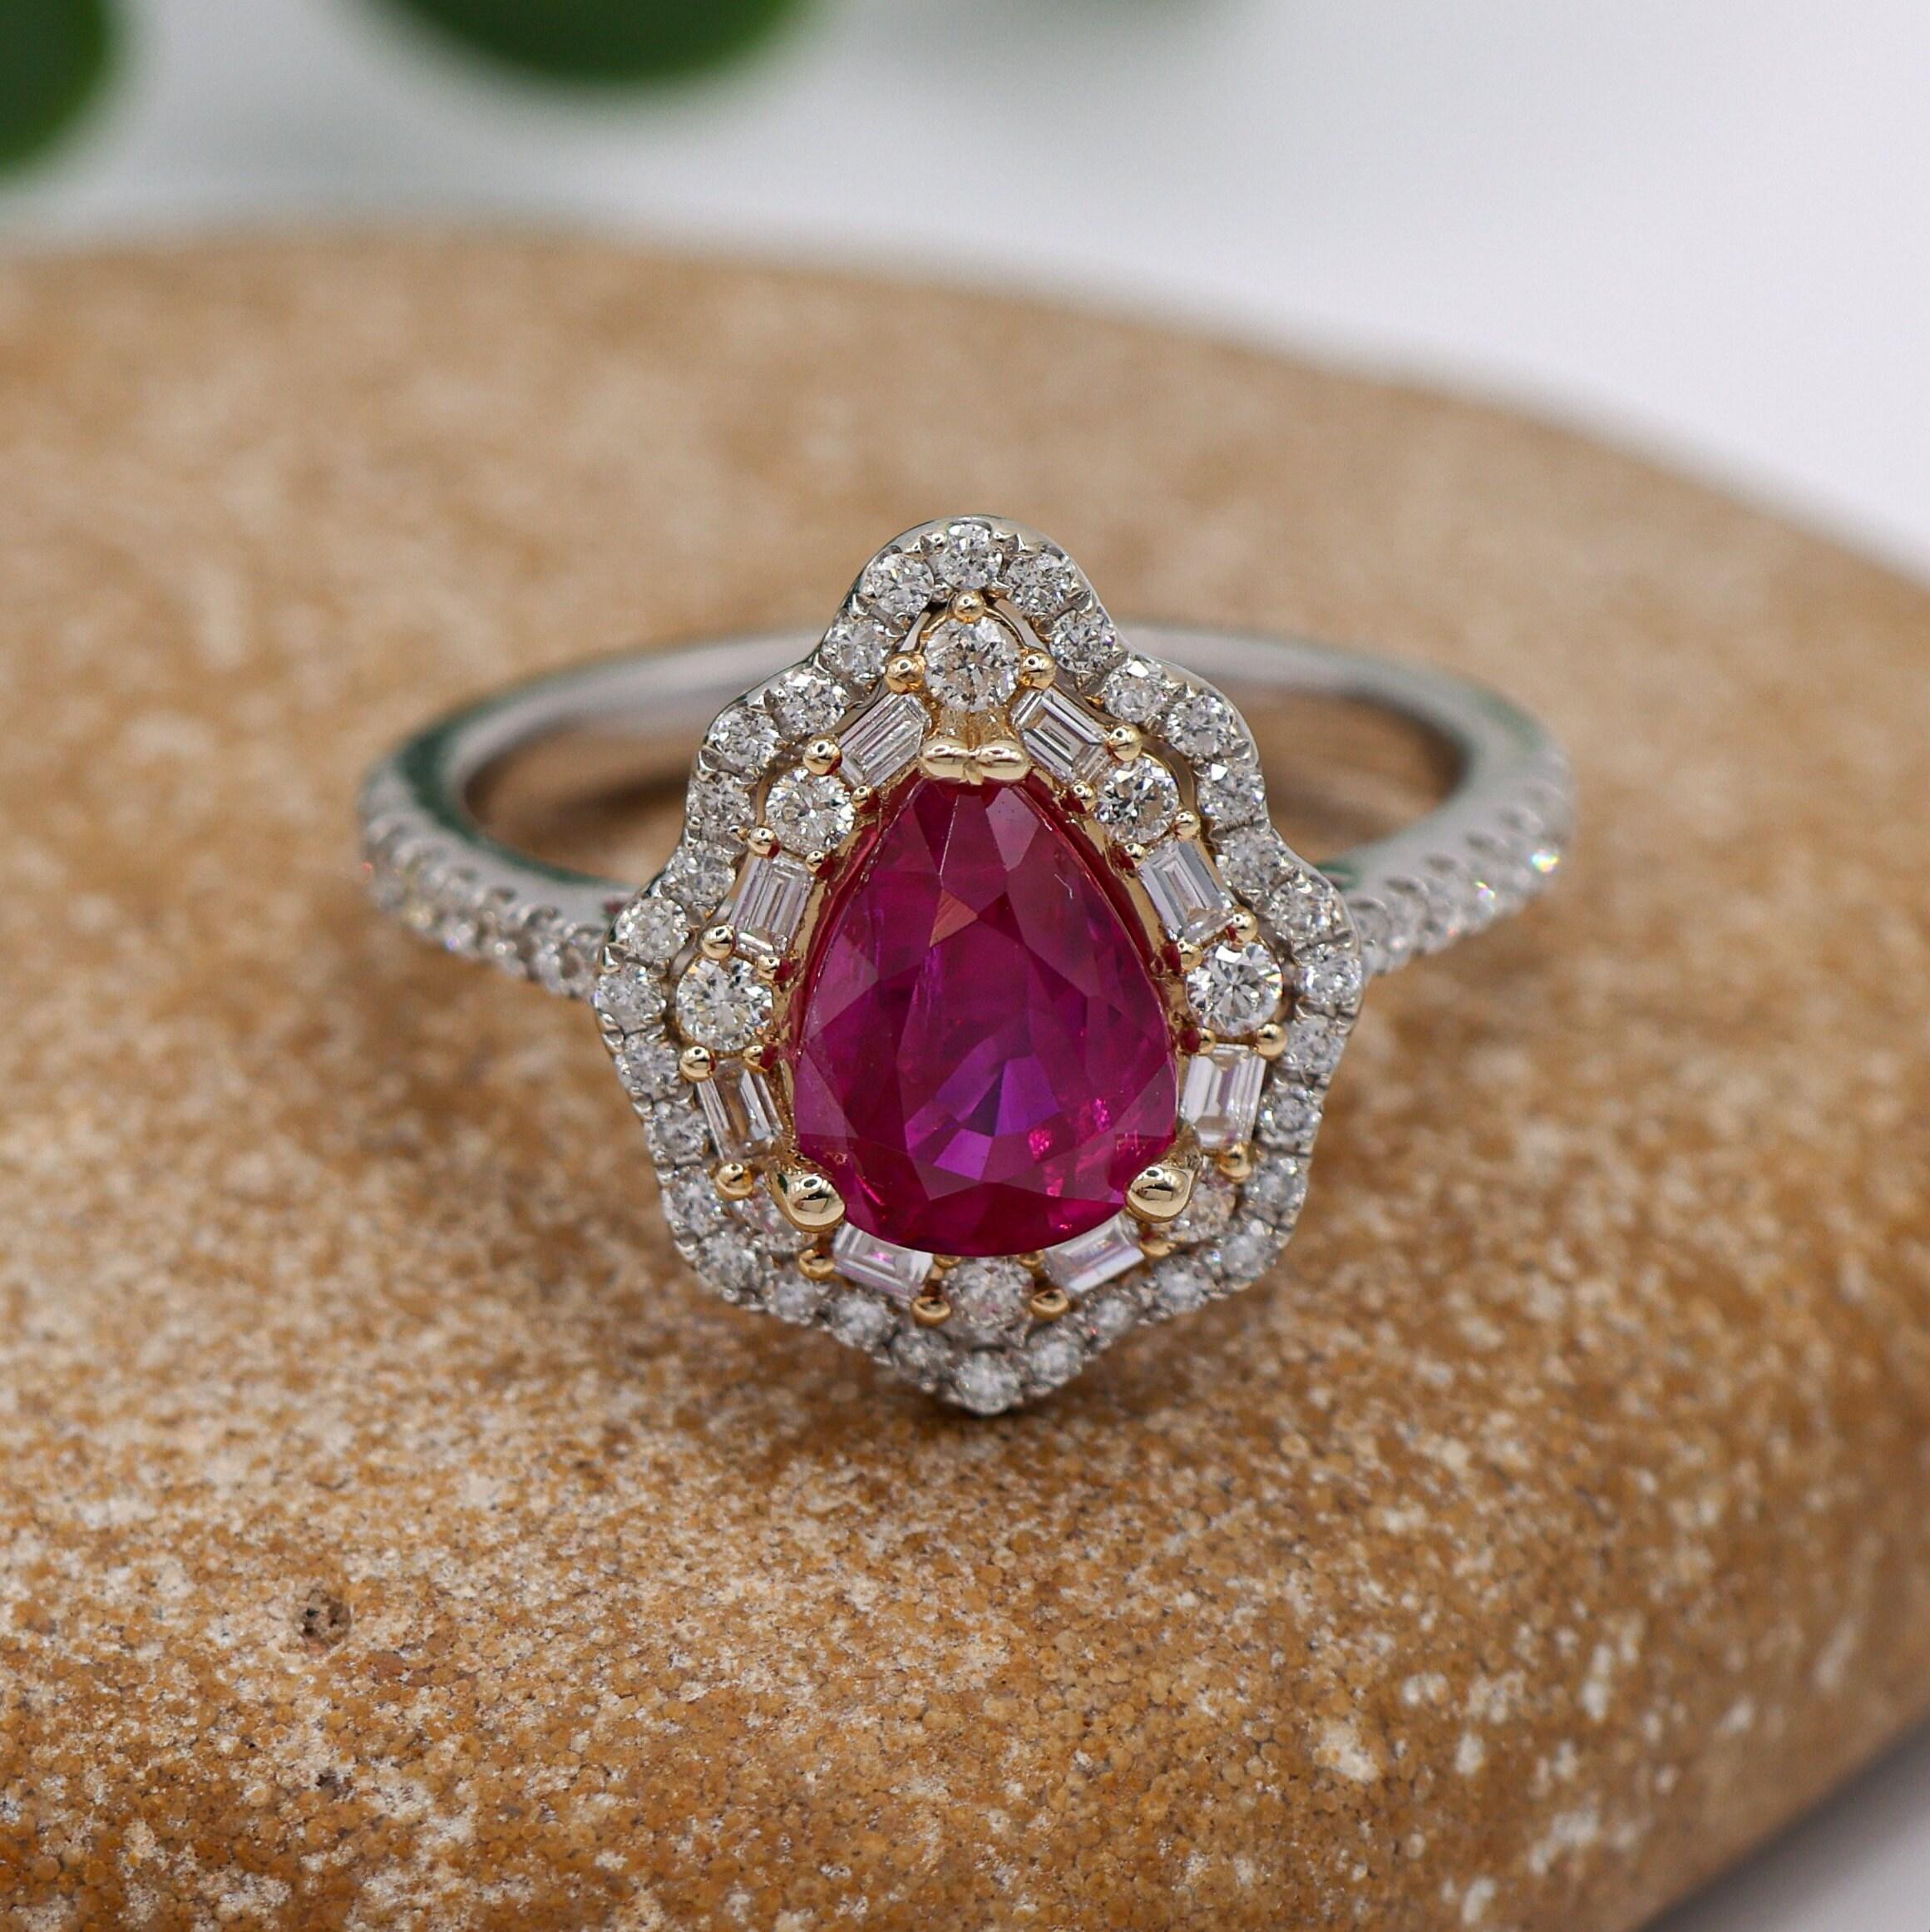 This stunning ring features a sparkling red Mozambizue ruby set in dual tone solid 14K rose and white gold with natural earth-mined diamonds. This statement ring makes for a stunning accessory to any look!

Specifications

Item Type: Ring
Center